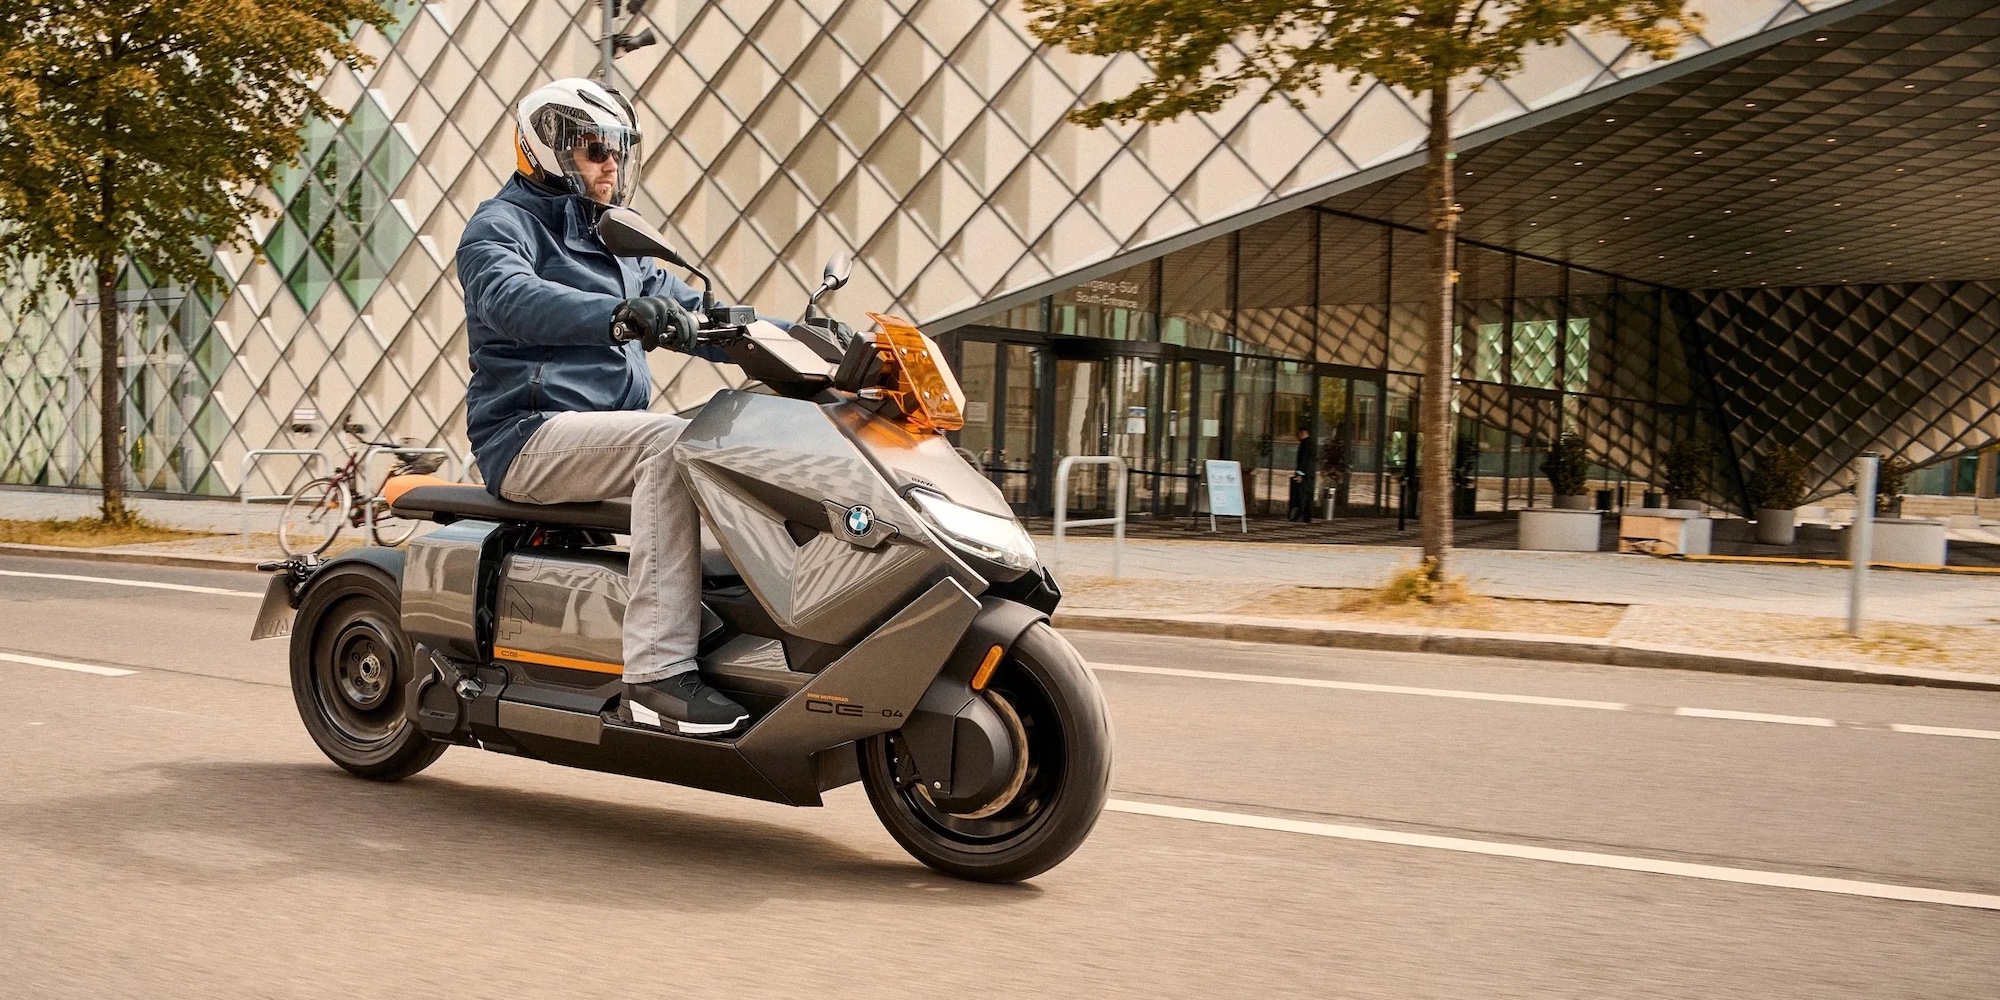 A view of BMW's electric scooter, the CE 04. Media sourced from Electrek.